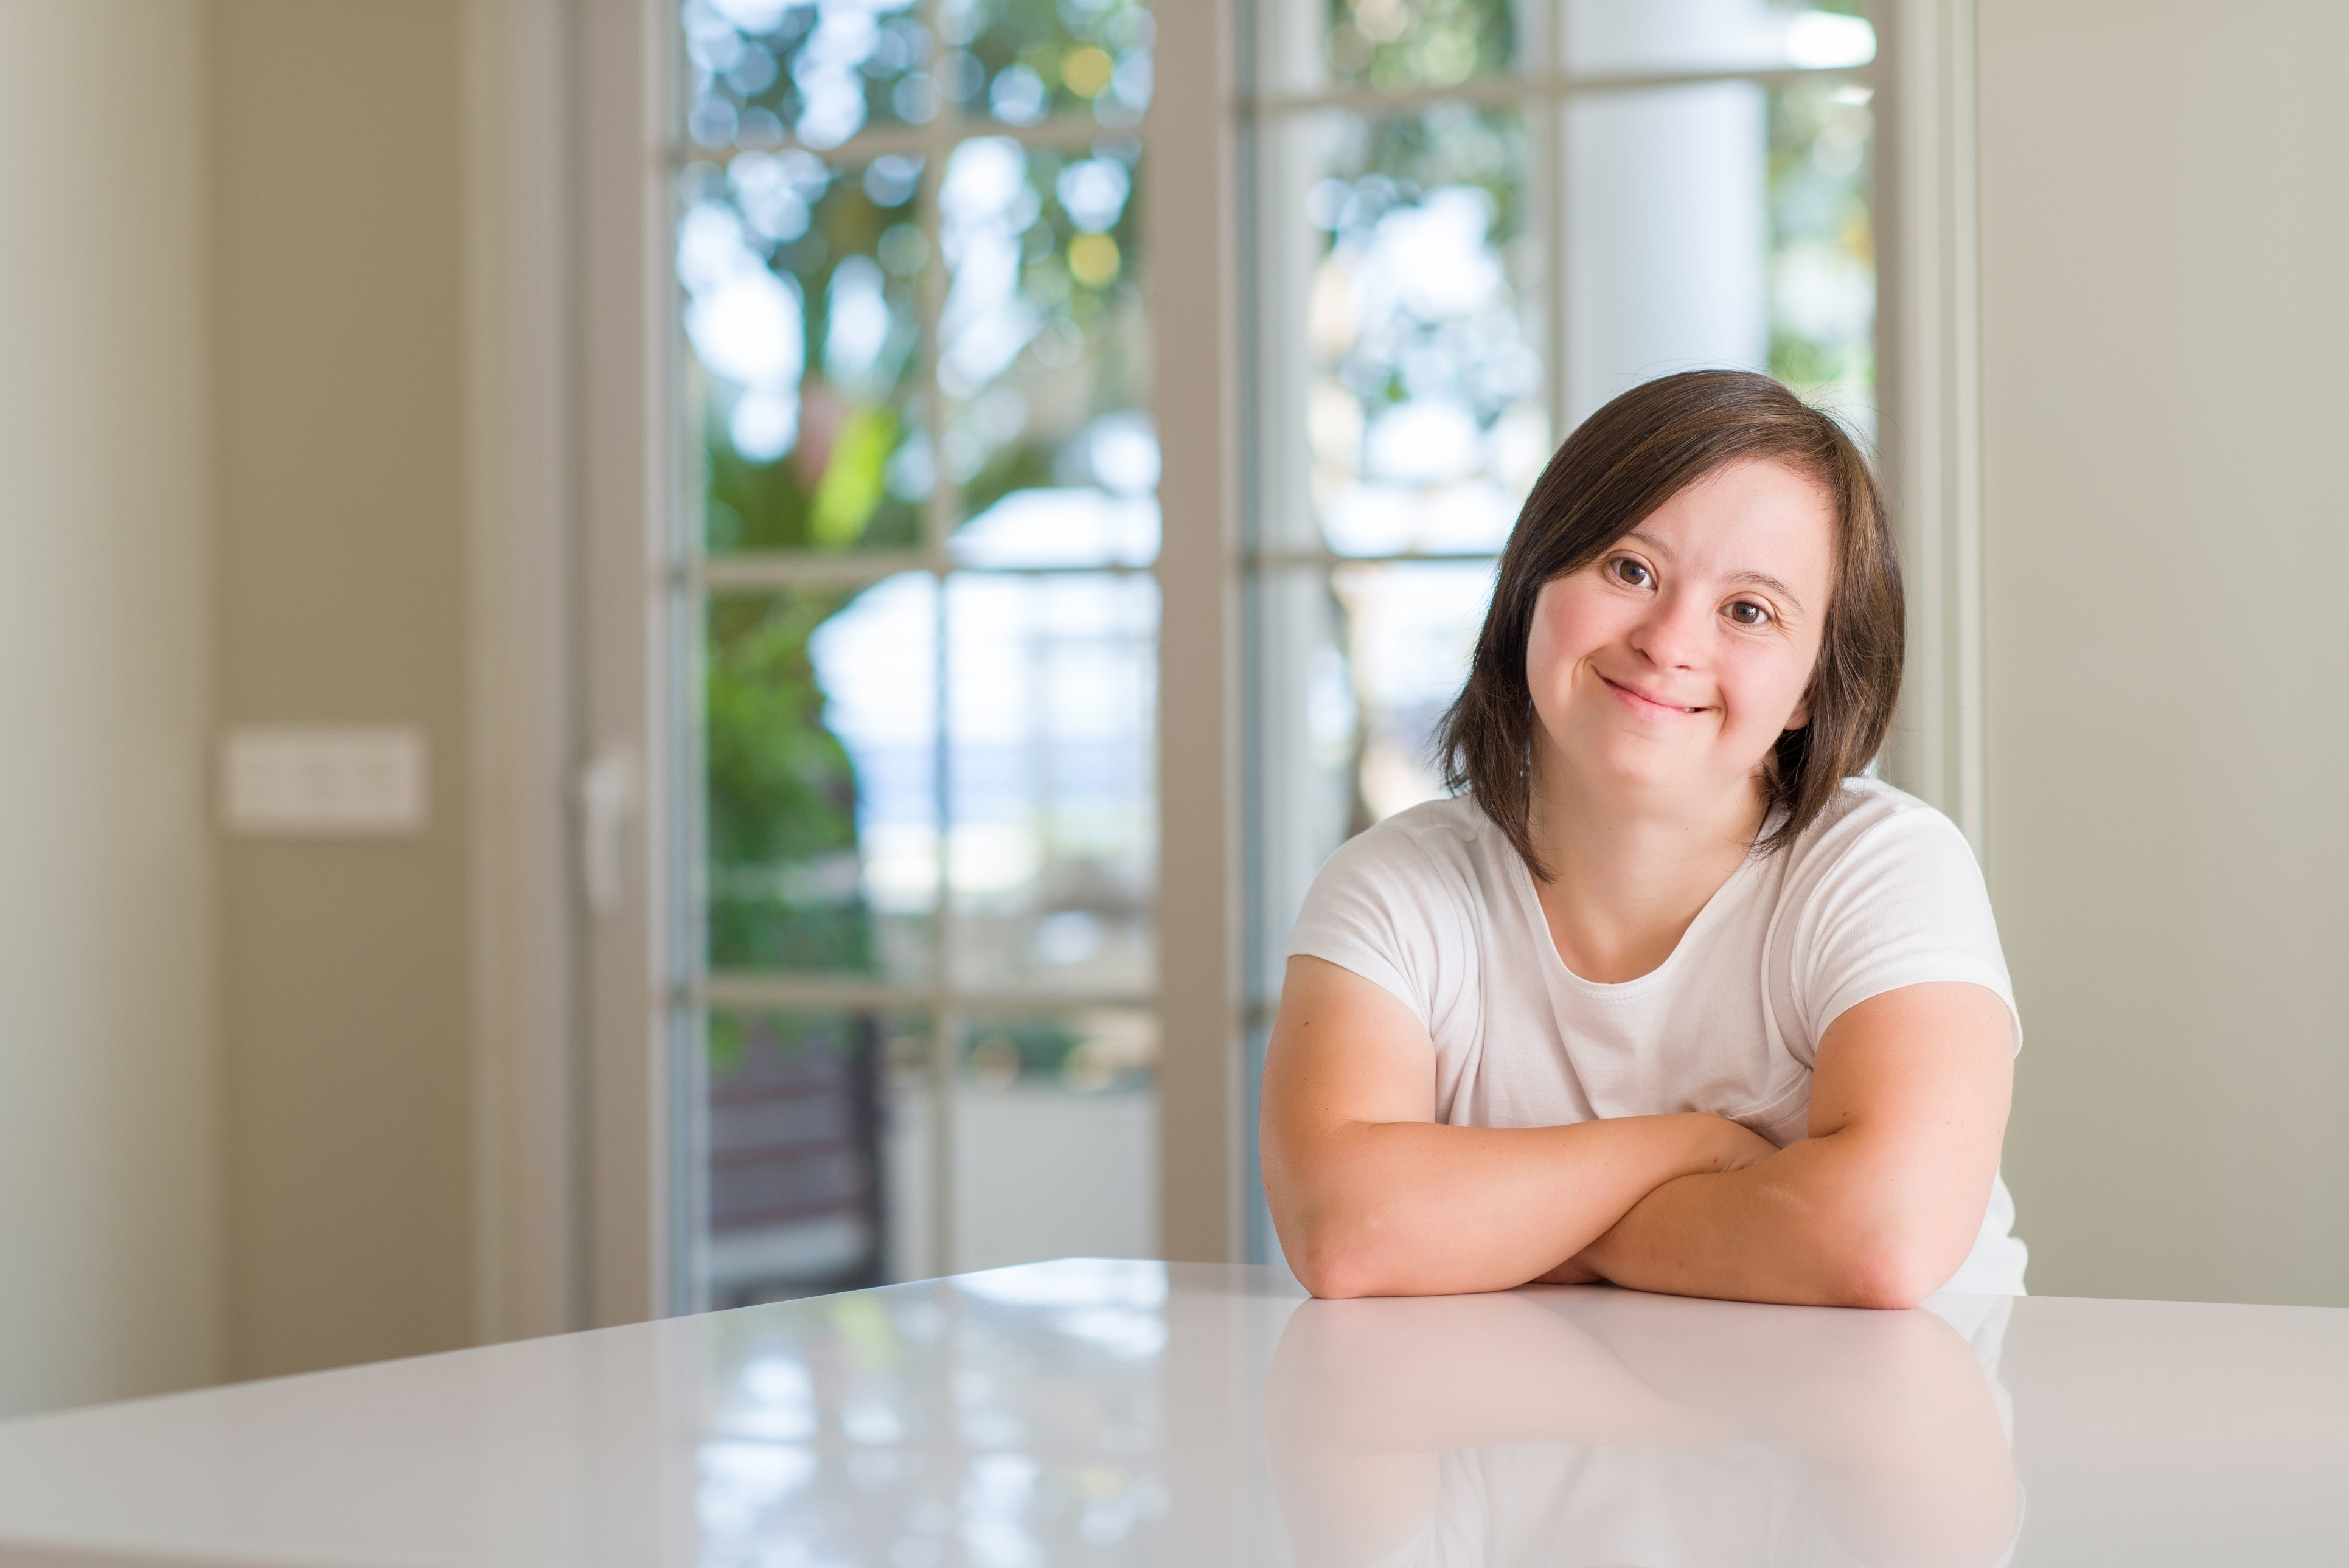 Girl in white shirt sits at table with arms folded, smiling - Call to Action - Focus Care